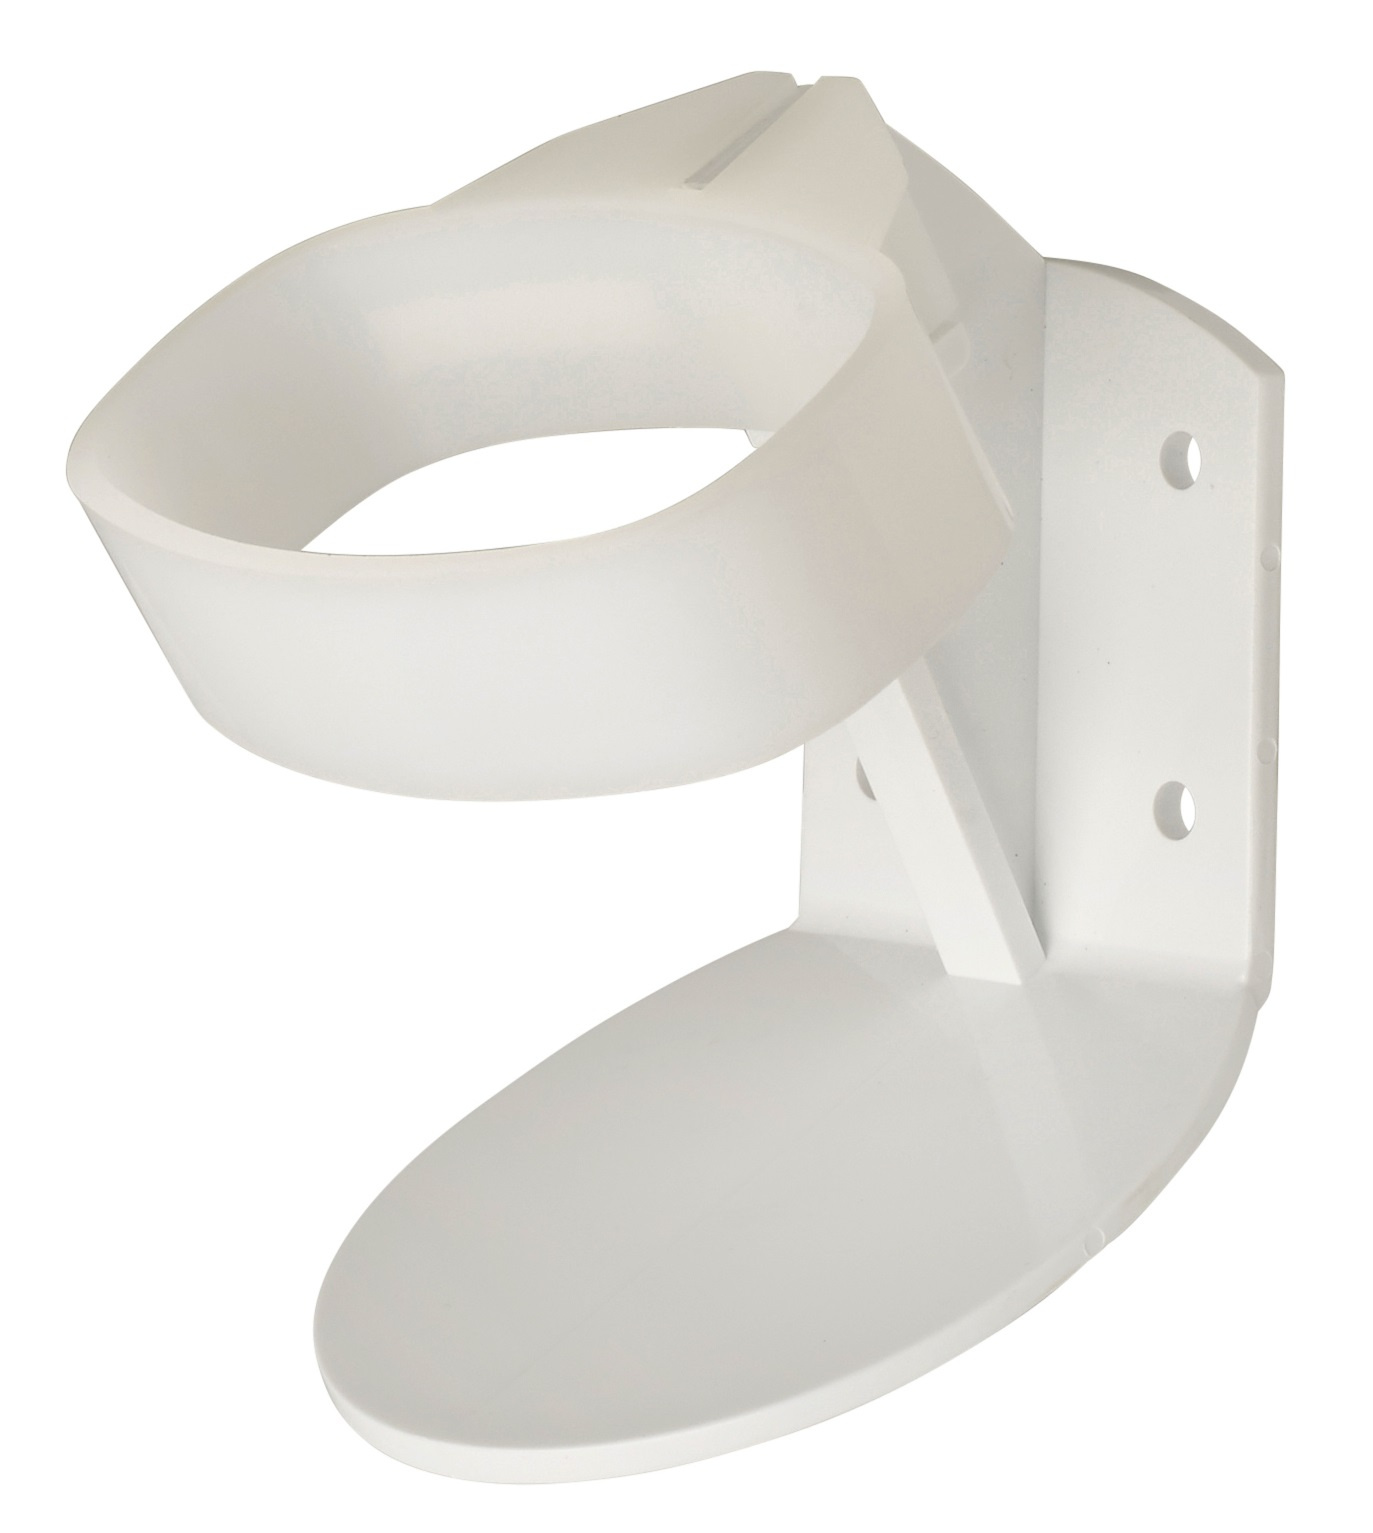 Microshield L-Shaped Angled Wall Bracket to fit 70000387 or 70000388